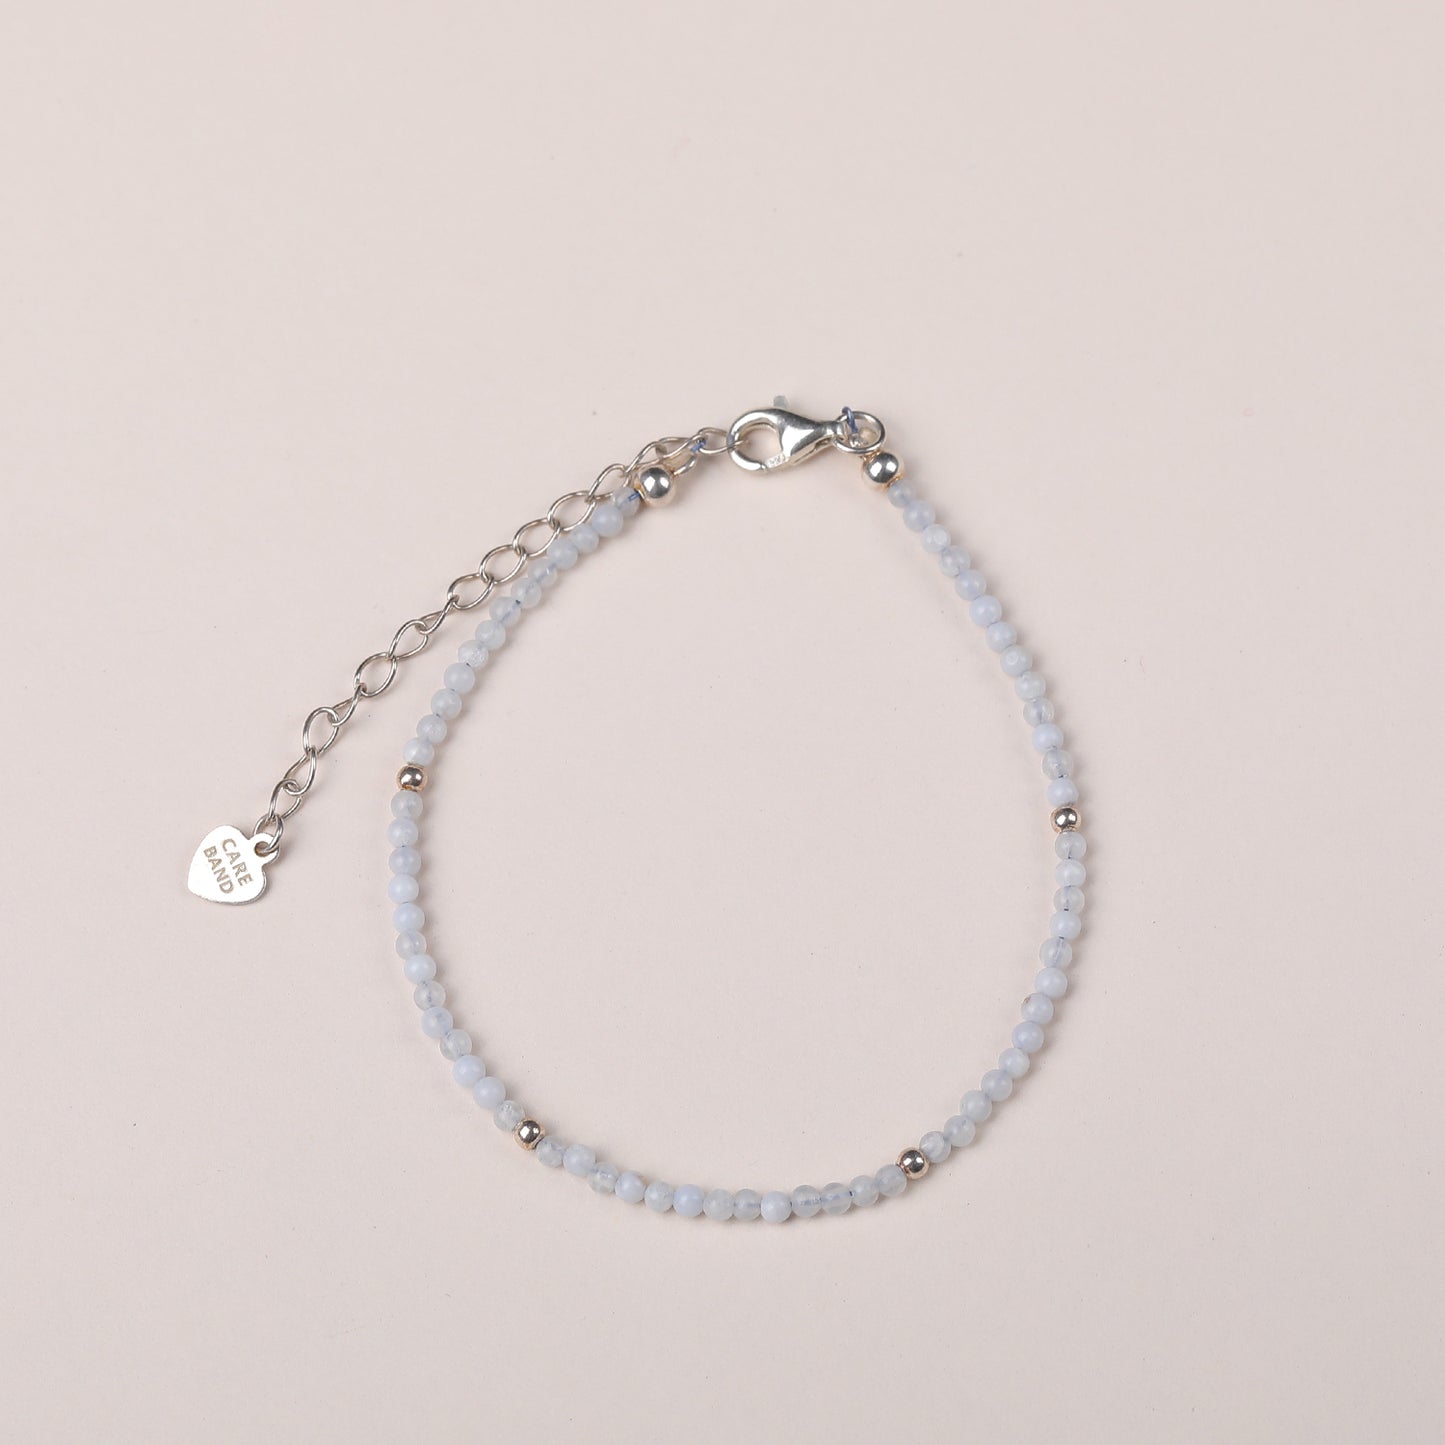 Care Band Blue Lace Agate Round Bracelet